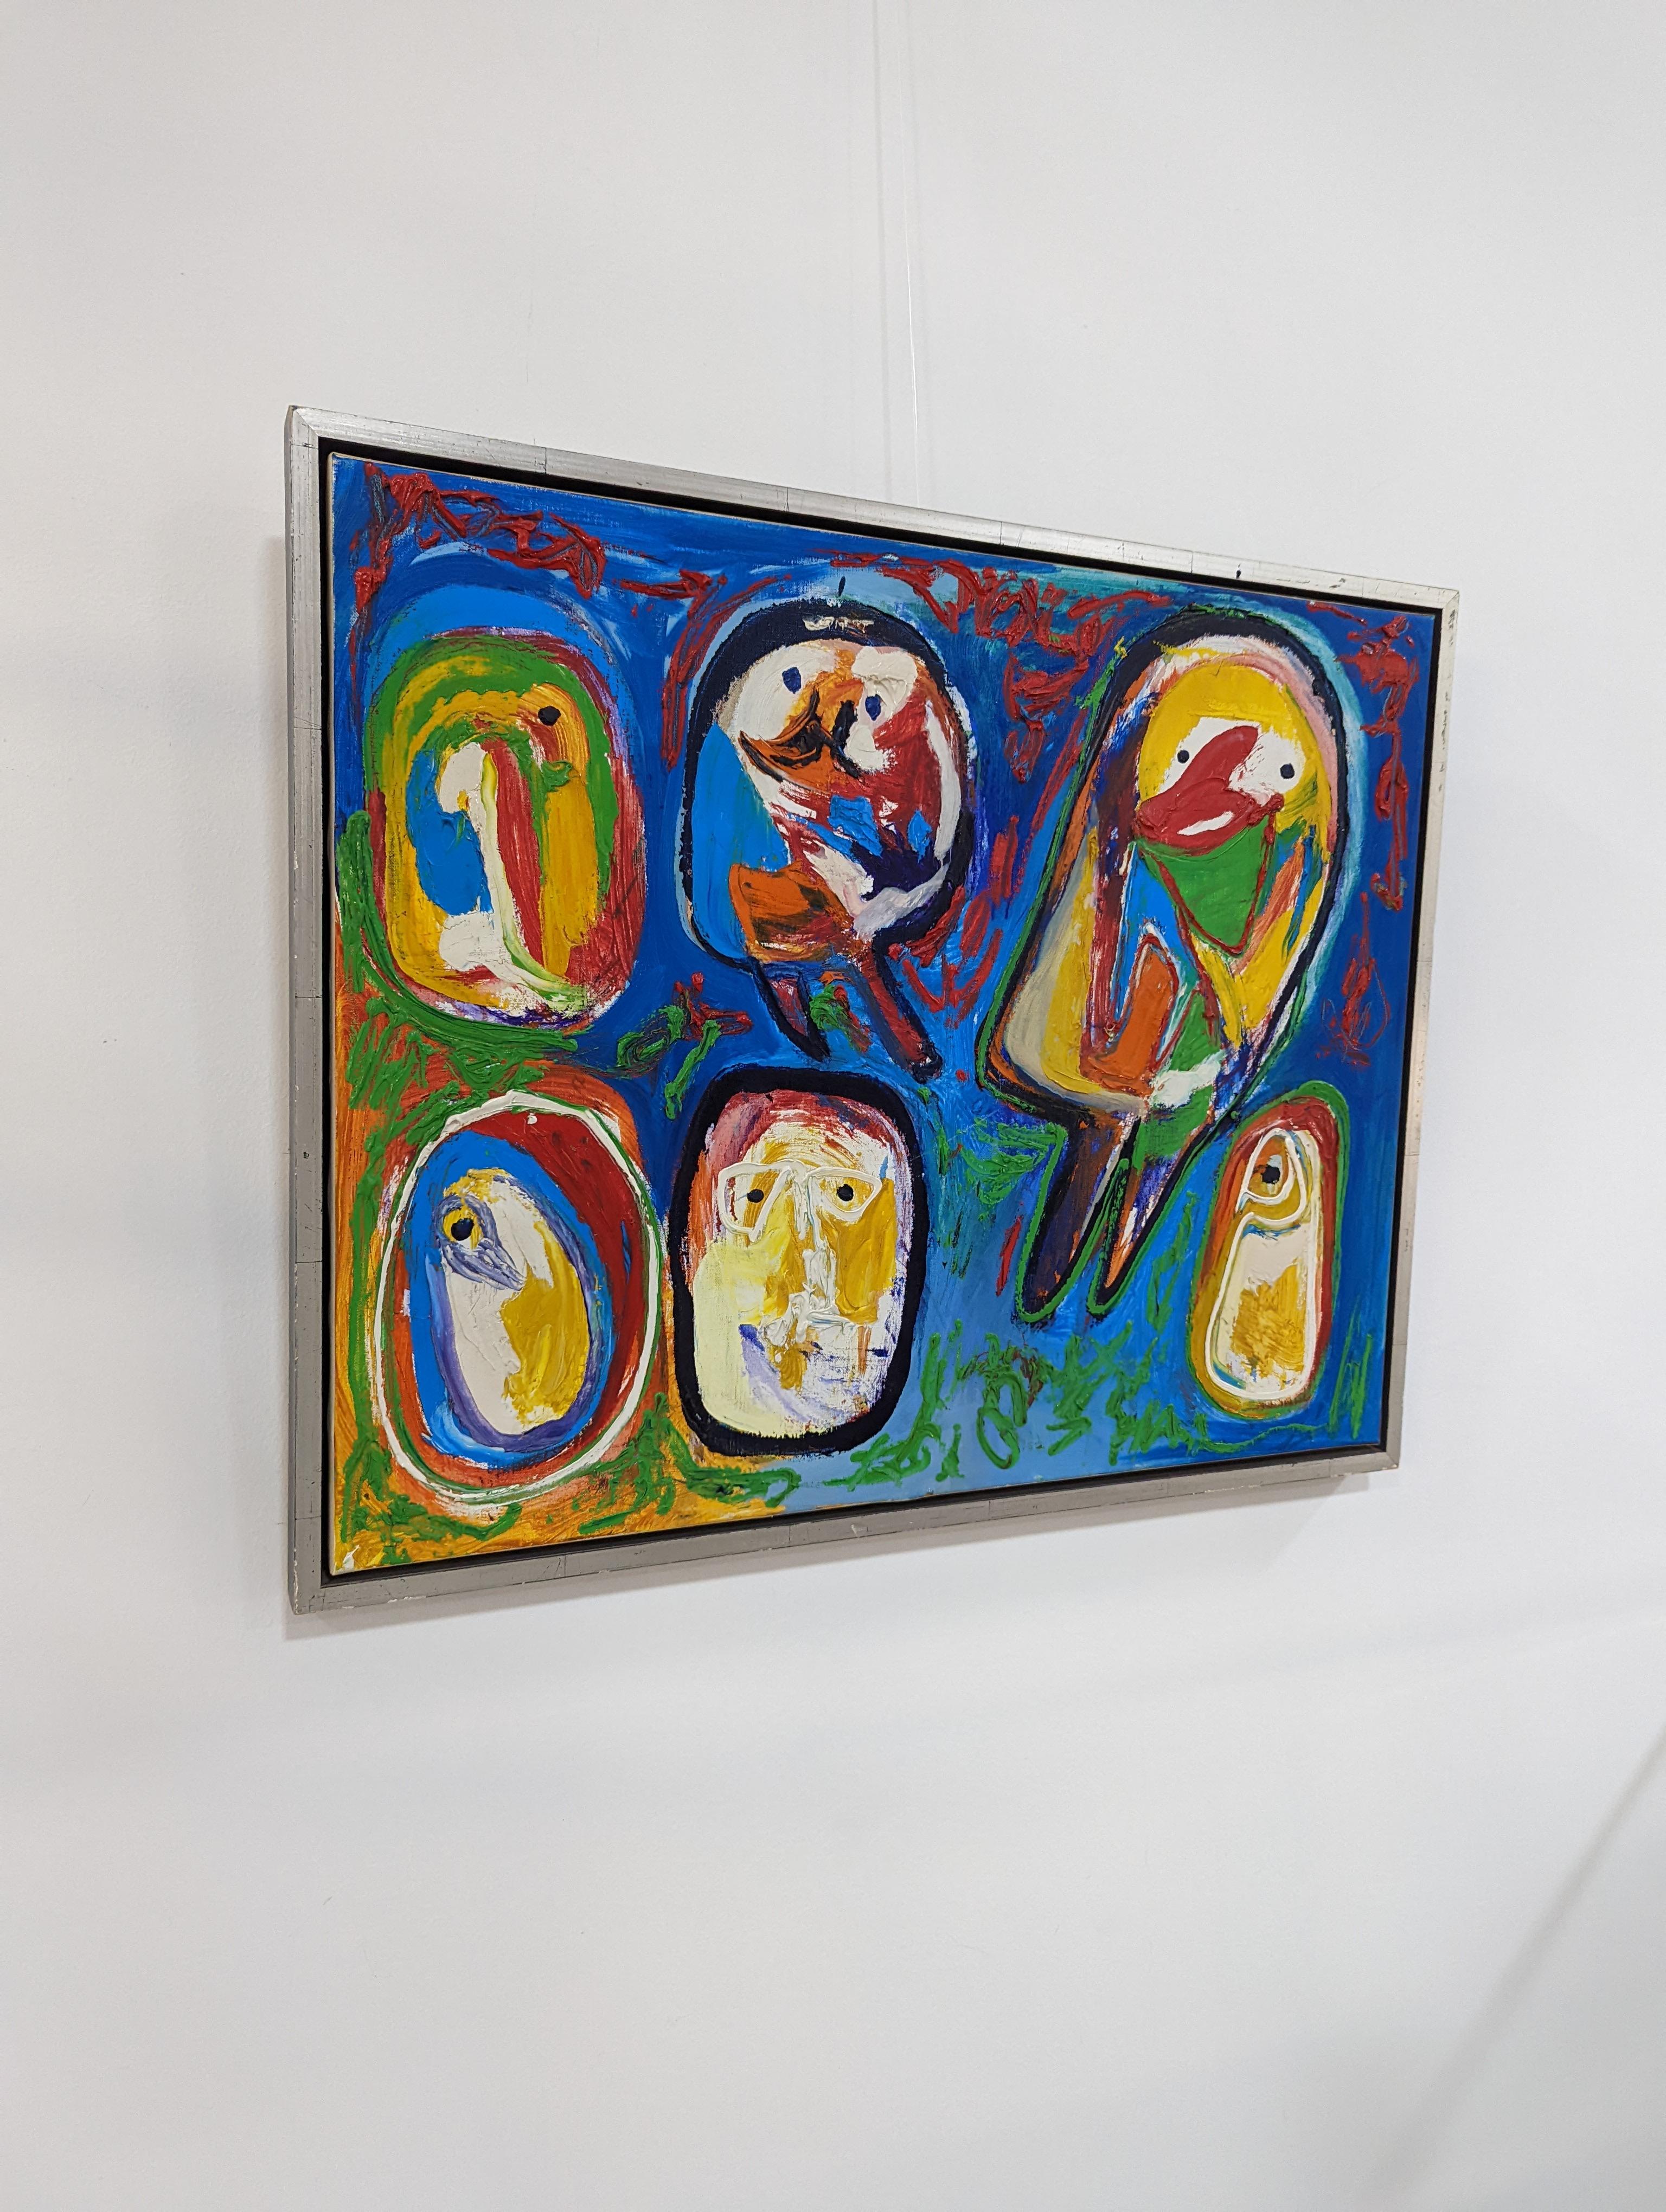 Wonderful work of the Danish artist Finn Pedersen, born in 1944 in Bornholm. In 1966, he exhibited with artists from the CoBrA group such as Asger Jorn and Karel Appel. His work is clearly influenced by the informal painting style of these artists.